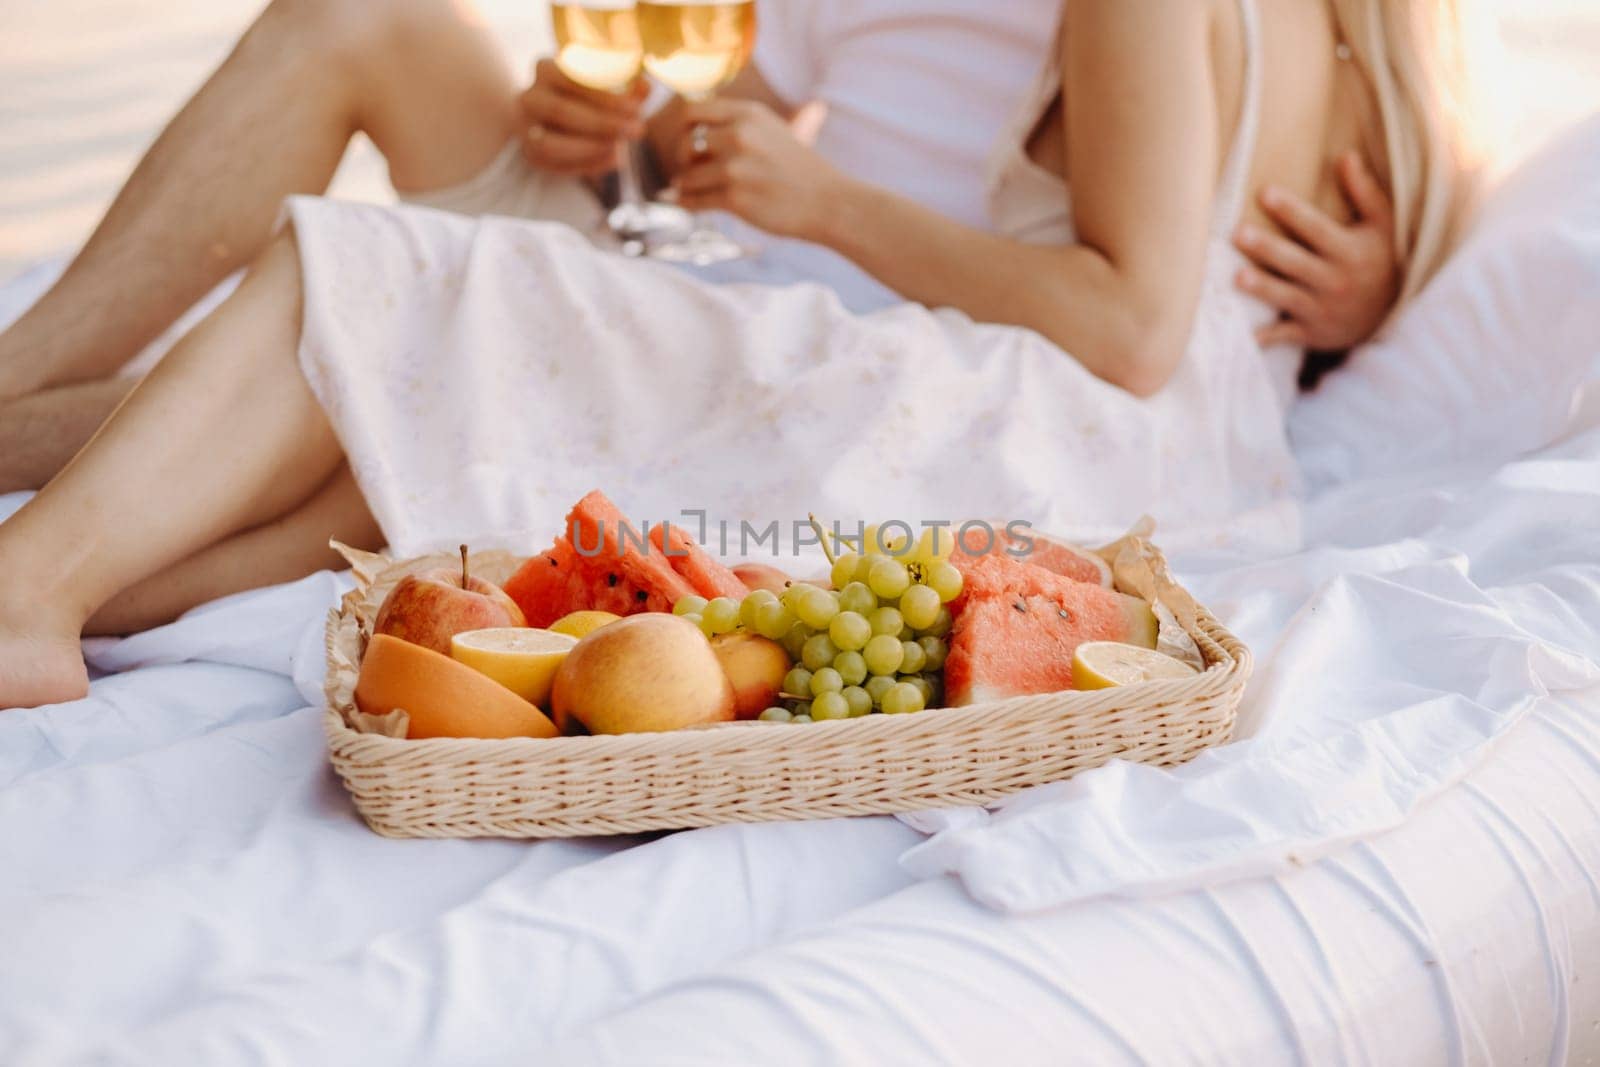 Assorted fruits in a tray on the background of a couple with glasses of wine at sunset.